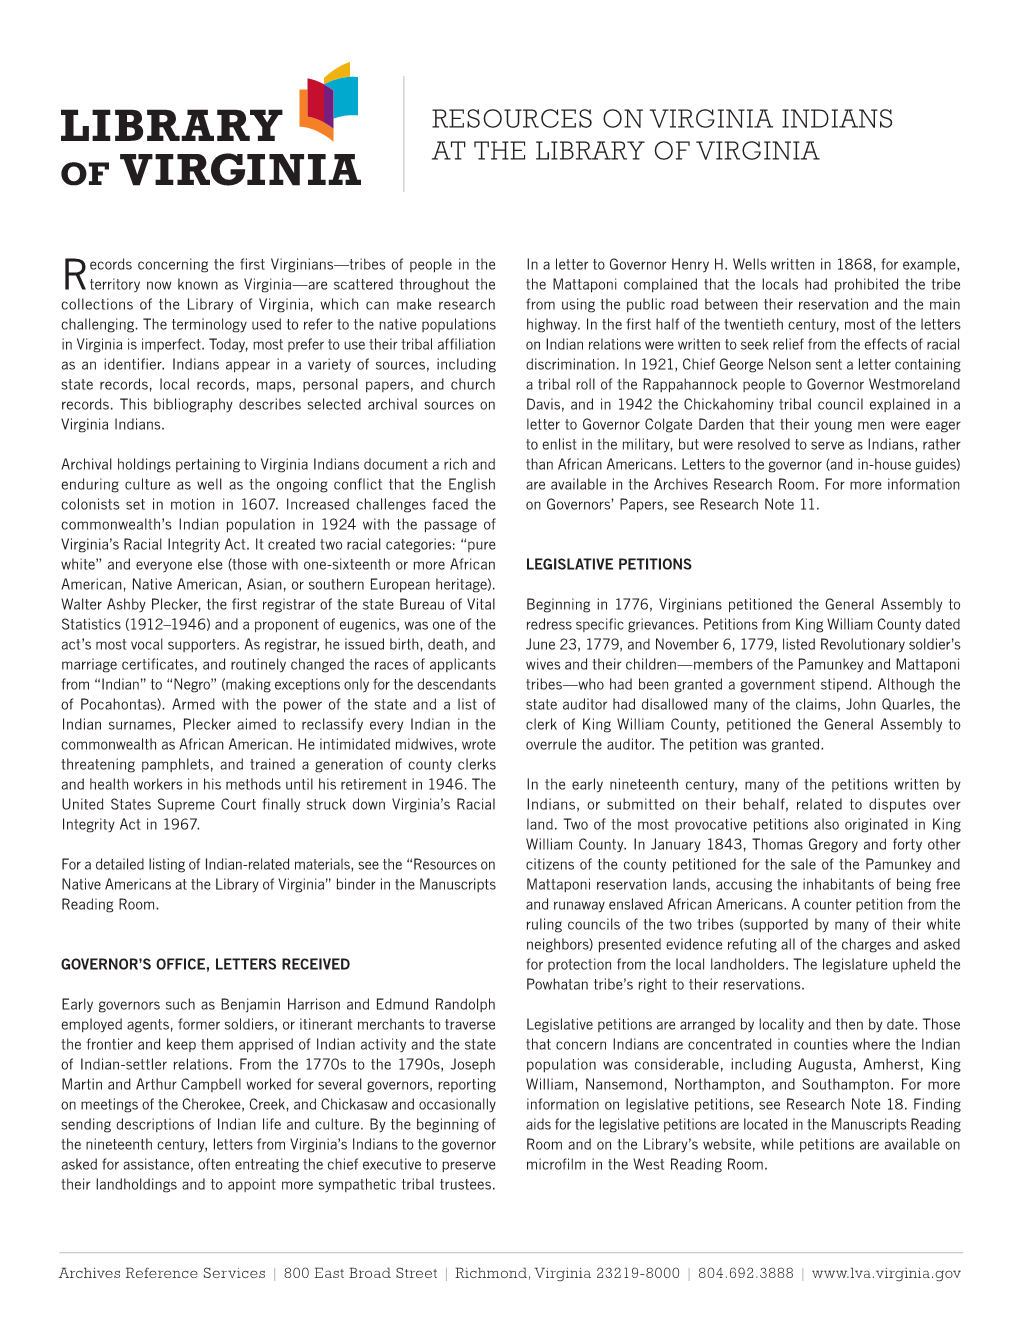 Resources on Virginia Indians at the Library of Virginia